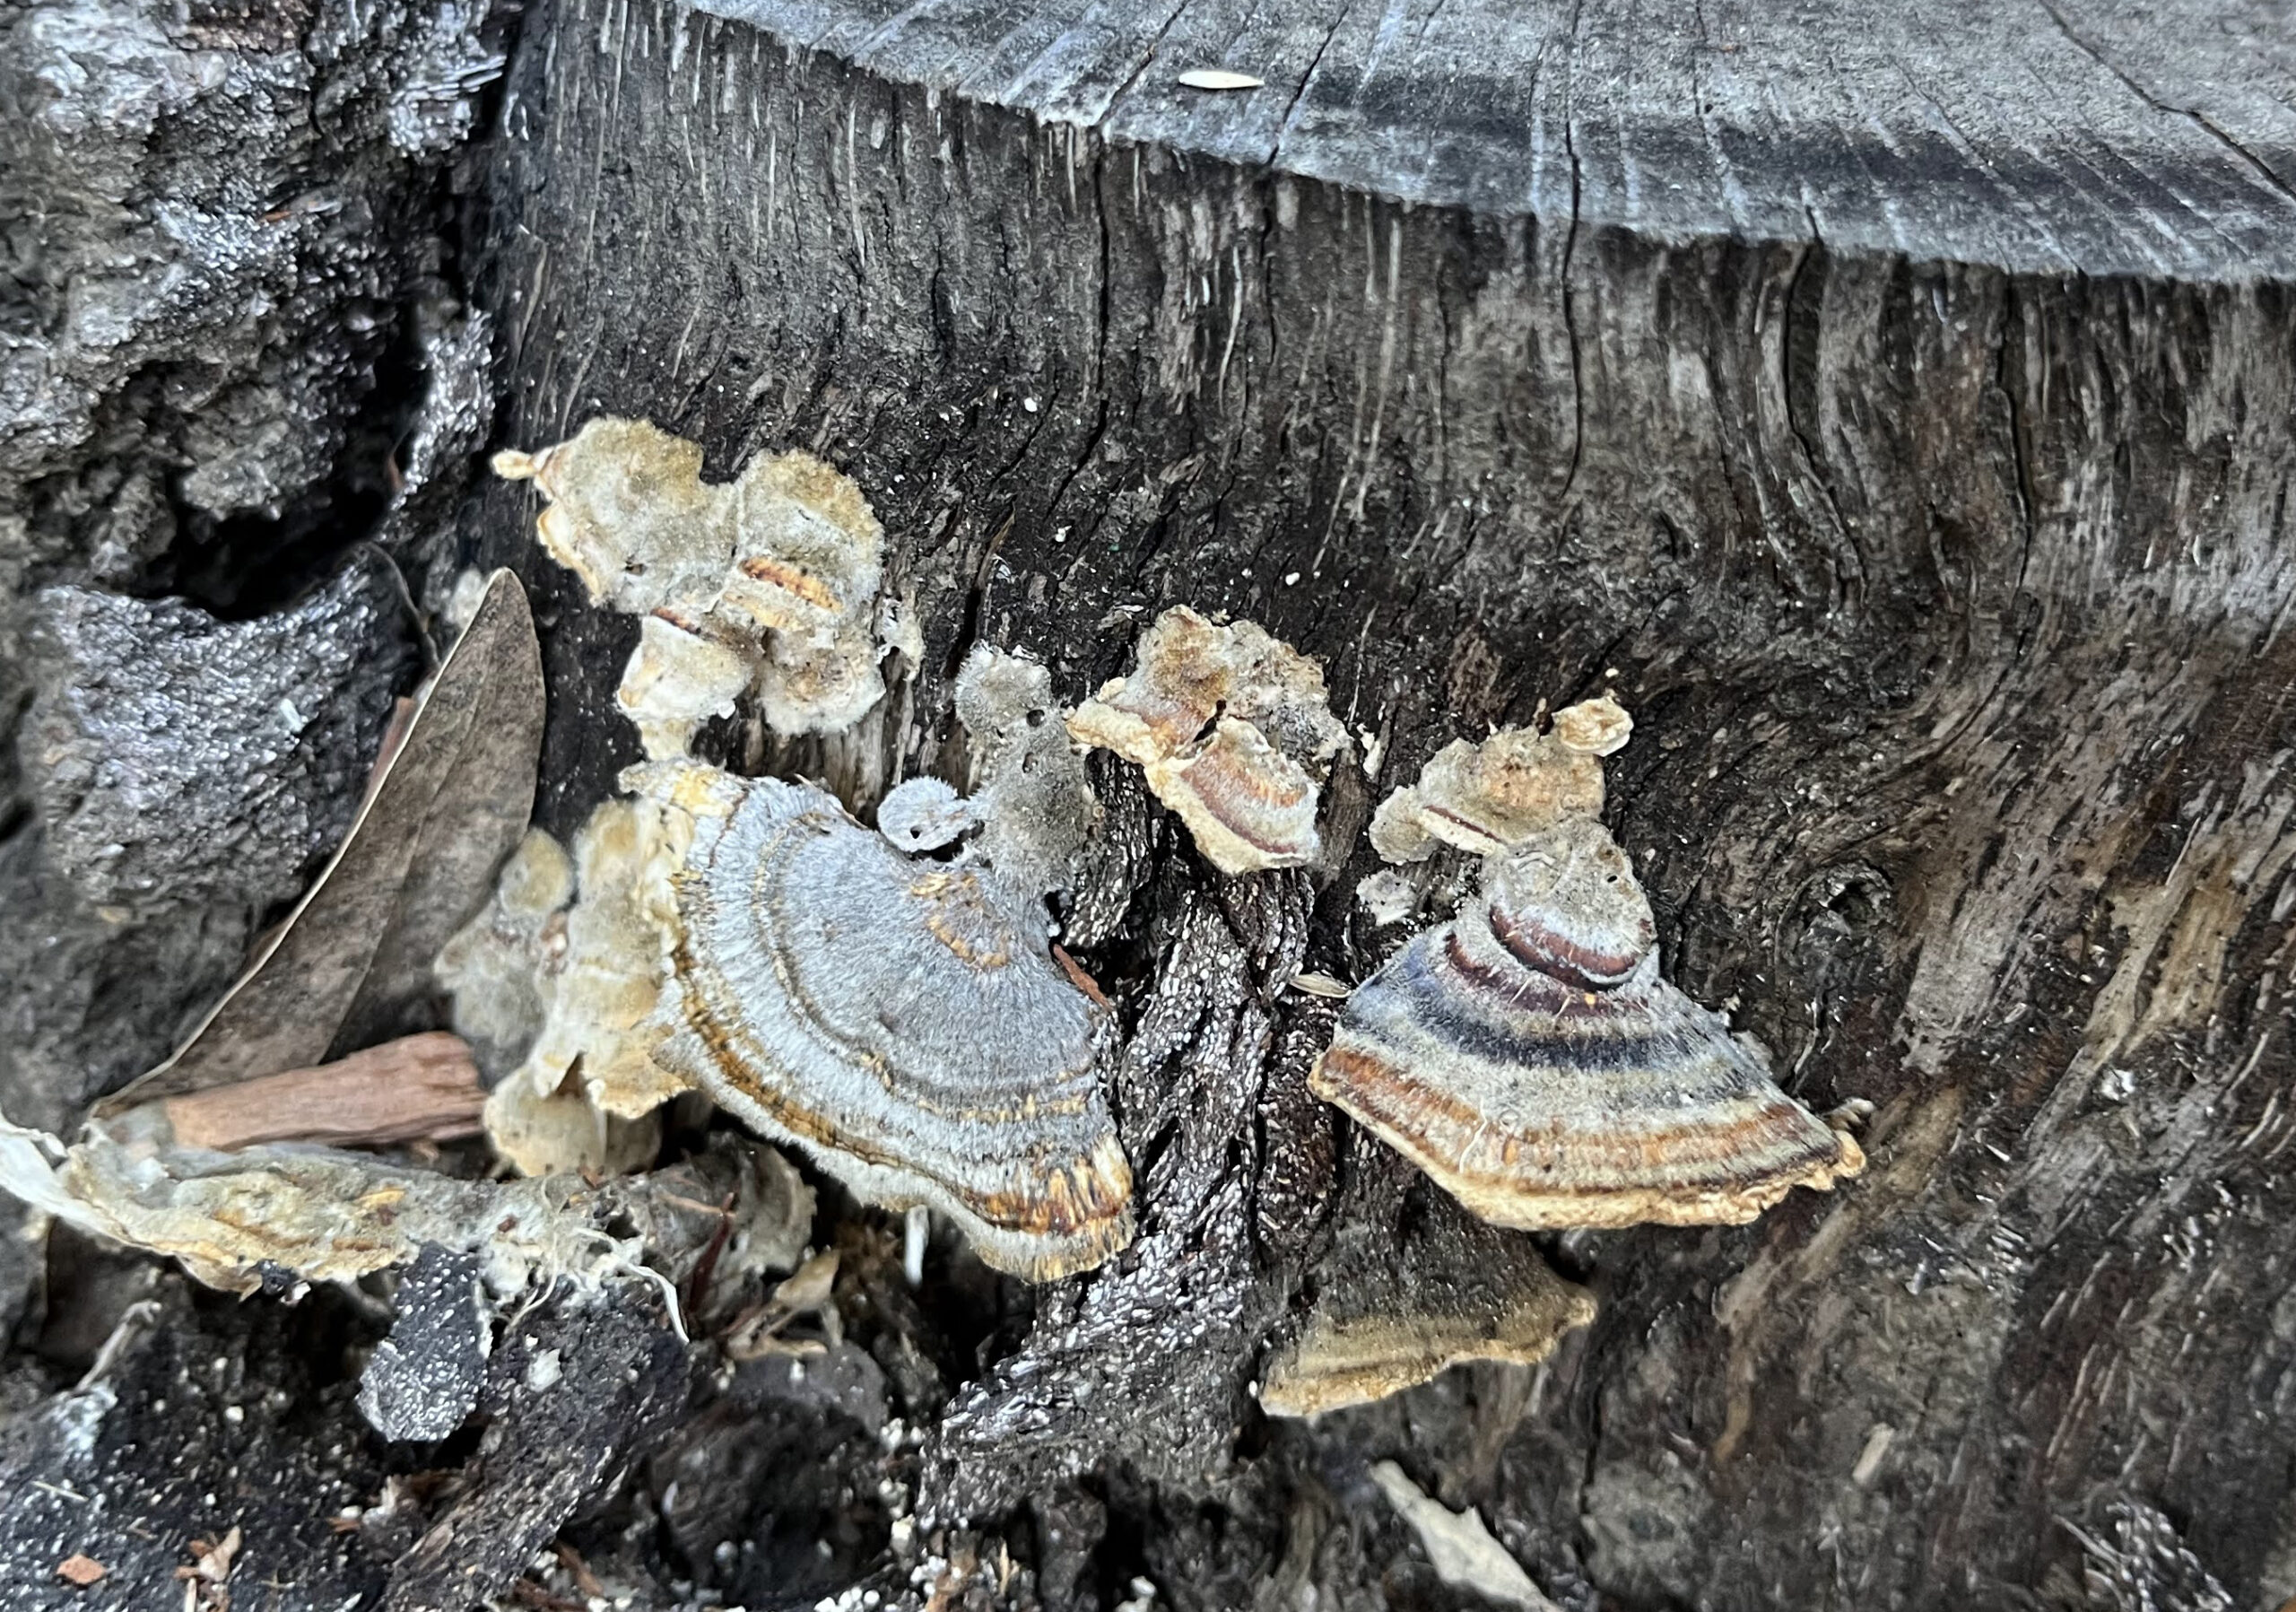 Mushrooms grown out of the side of a tree stump